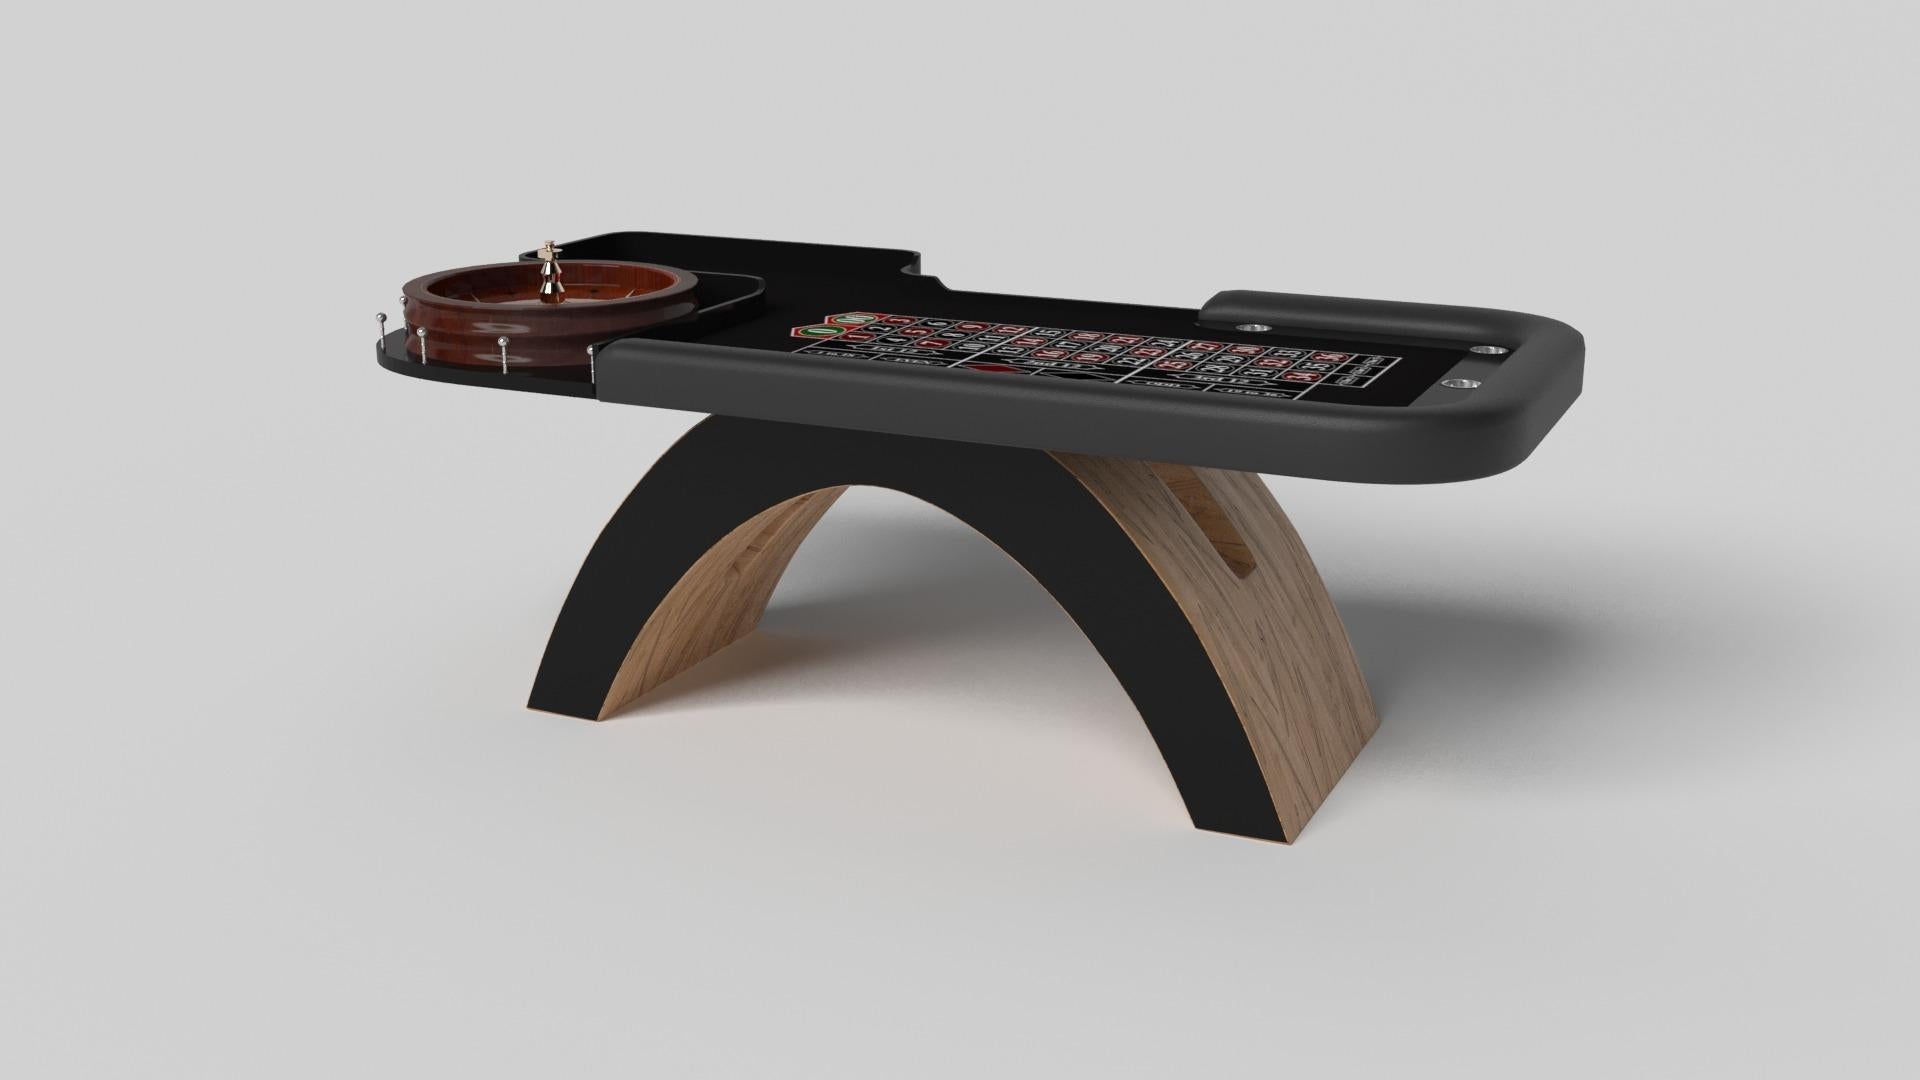 An open, arched base balances beautifully against the hard edges of the rectangular surface top, making the Zenith roulette table in black and red a striking juxtaposition of modern, geometric forms. Minimalist in its appeal yet luxurious in design,